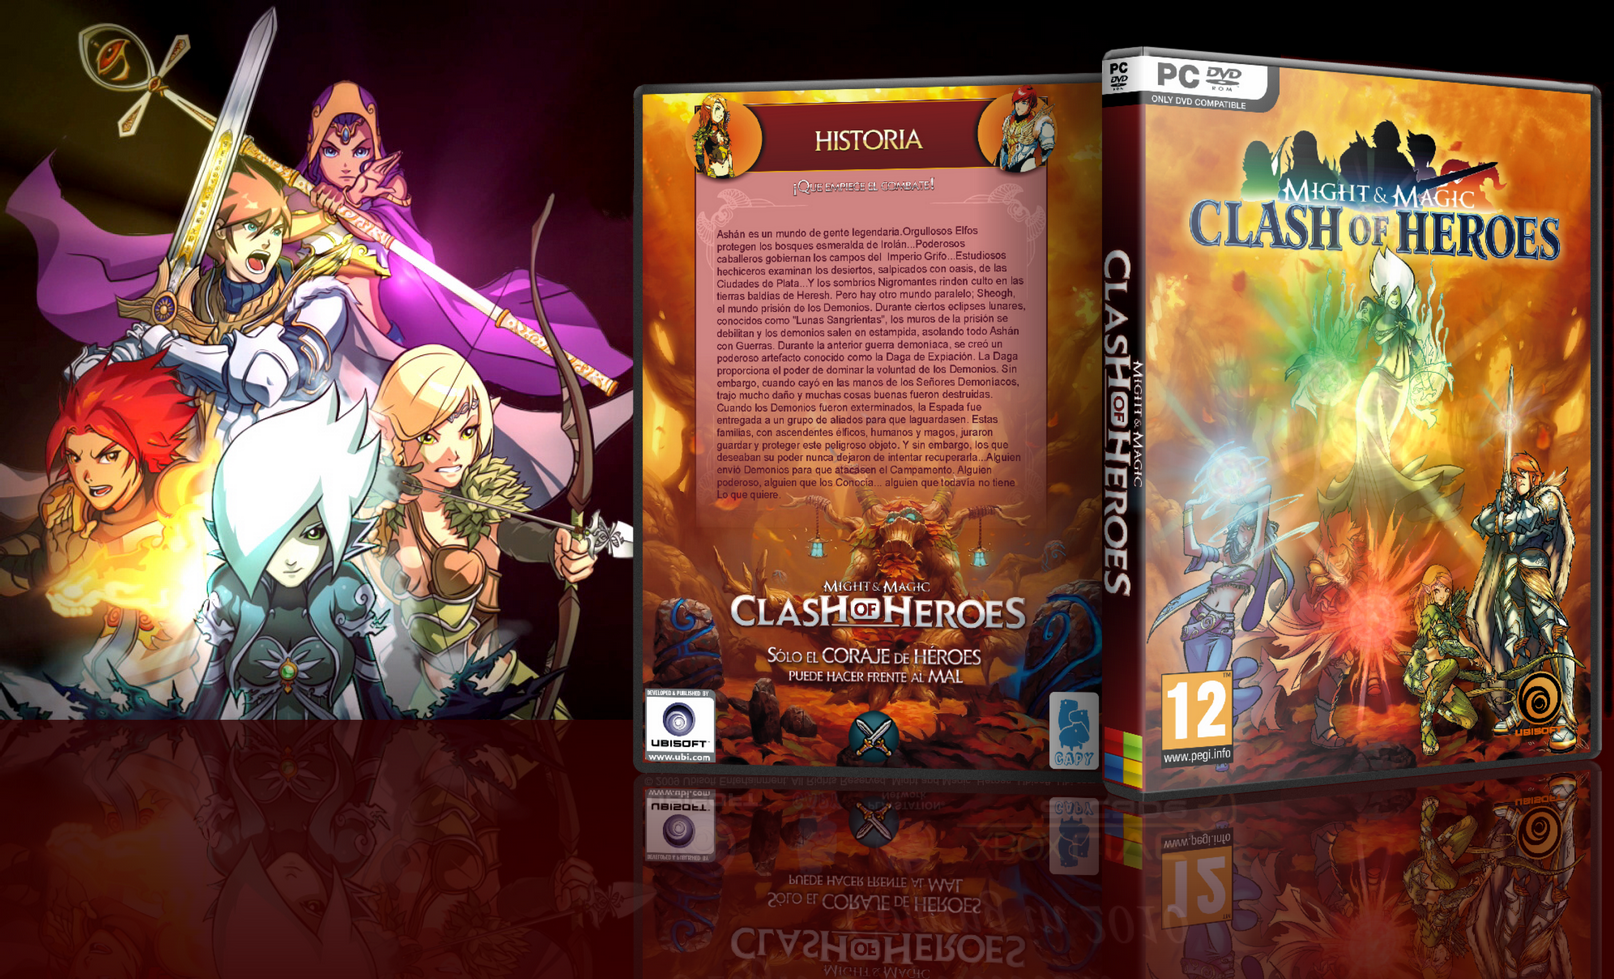 Might Magic Clash Of Heroes box cover